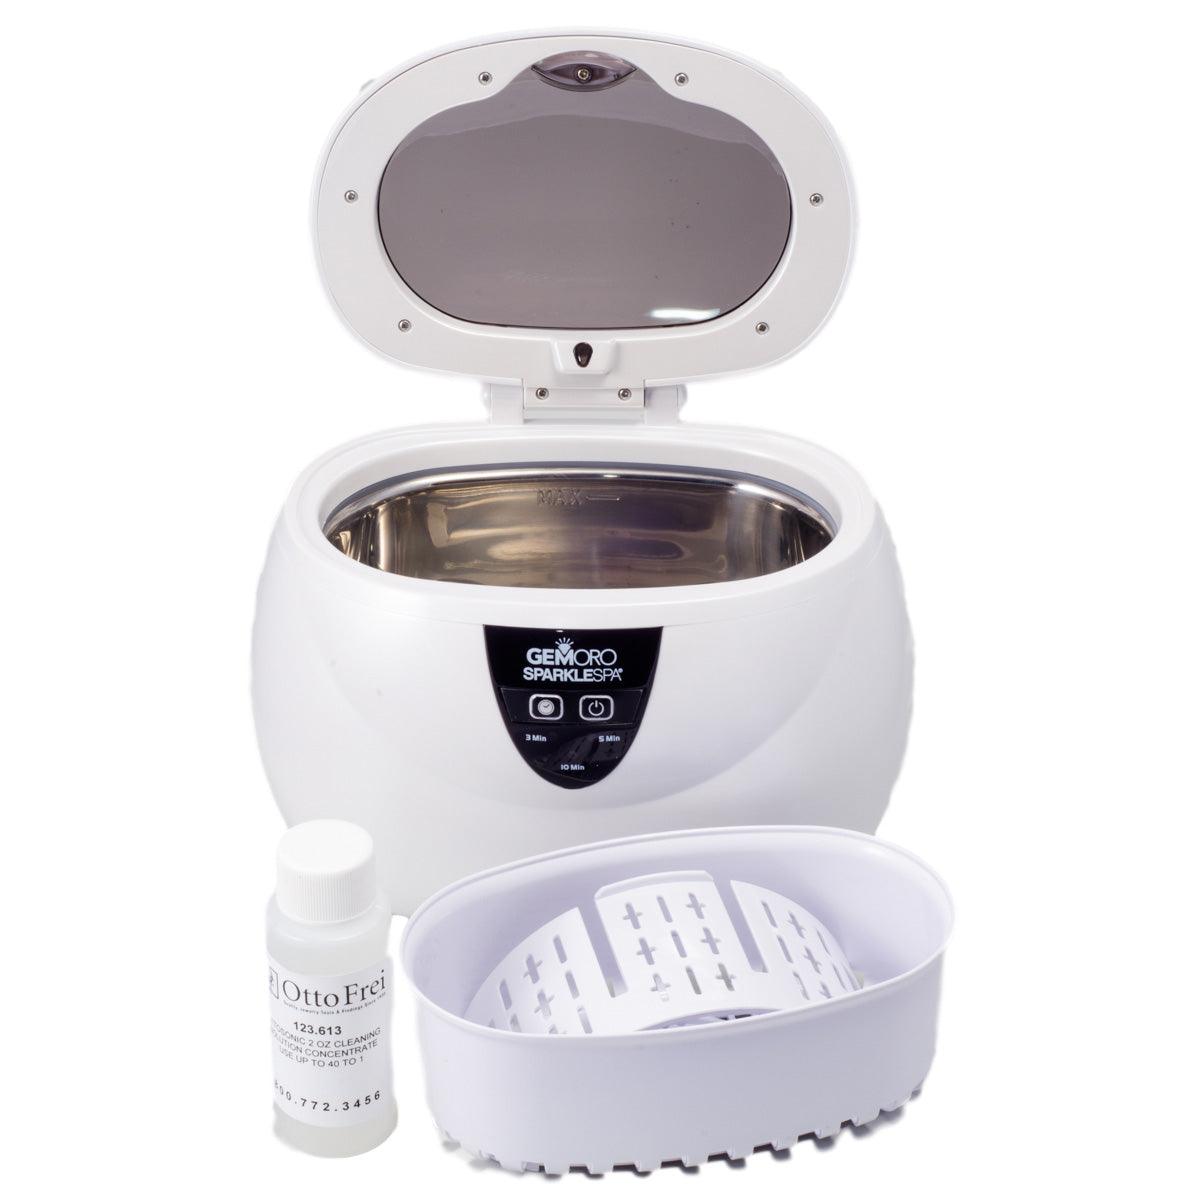 BLITZ Concentrated Jewelry Cleaning Solution For Ultrasonic